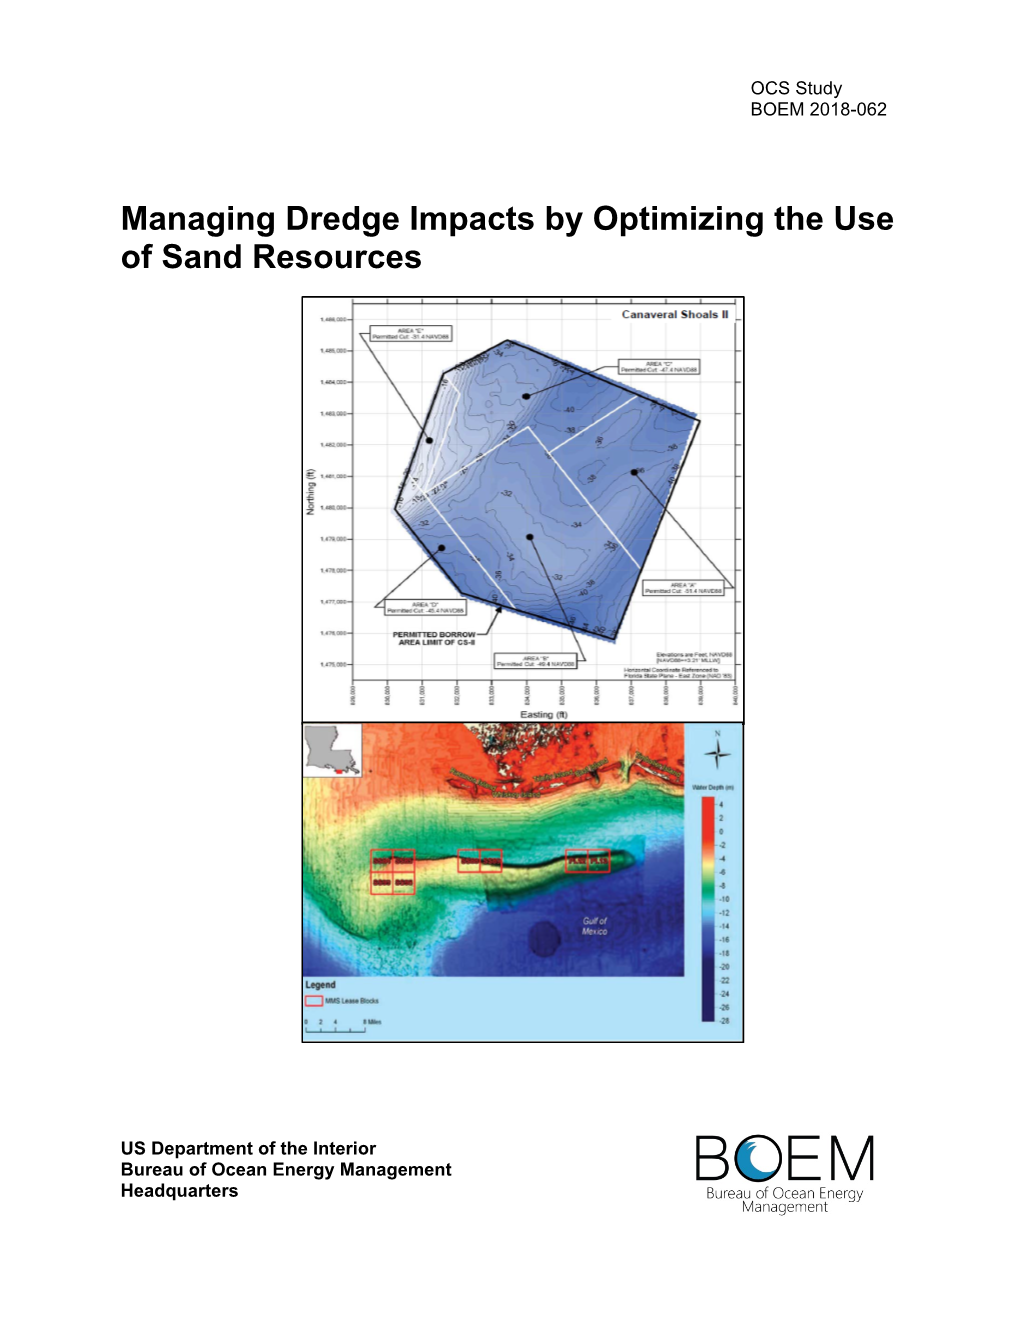 Managing Dredge Impacts by Optimizing the Use of Sand Resources